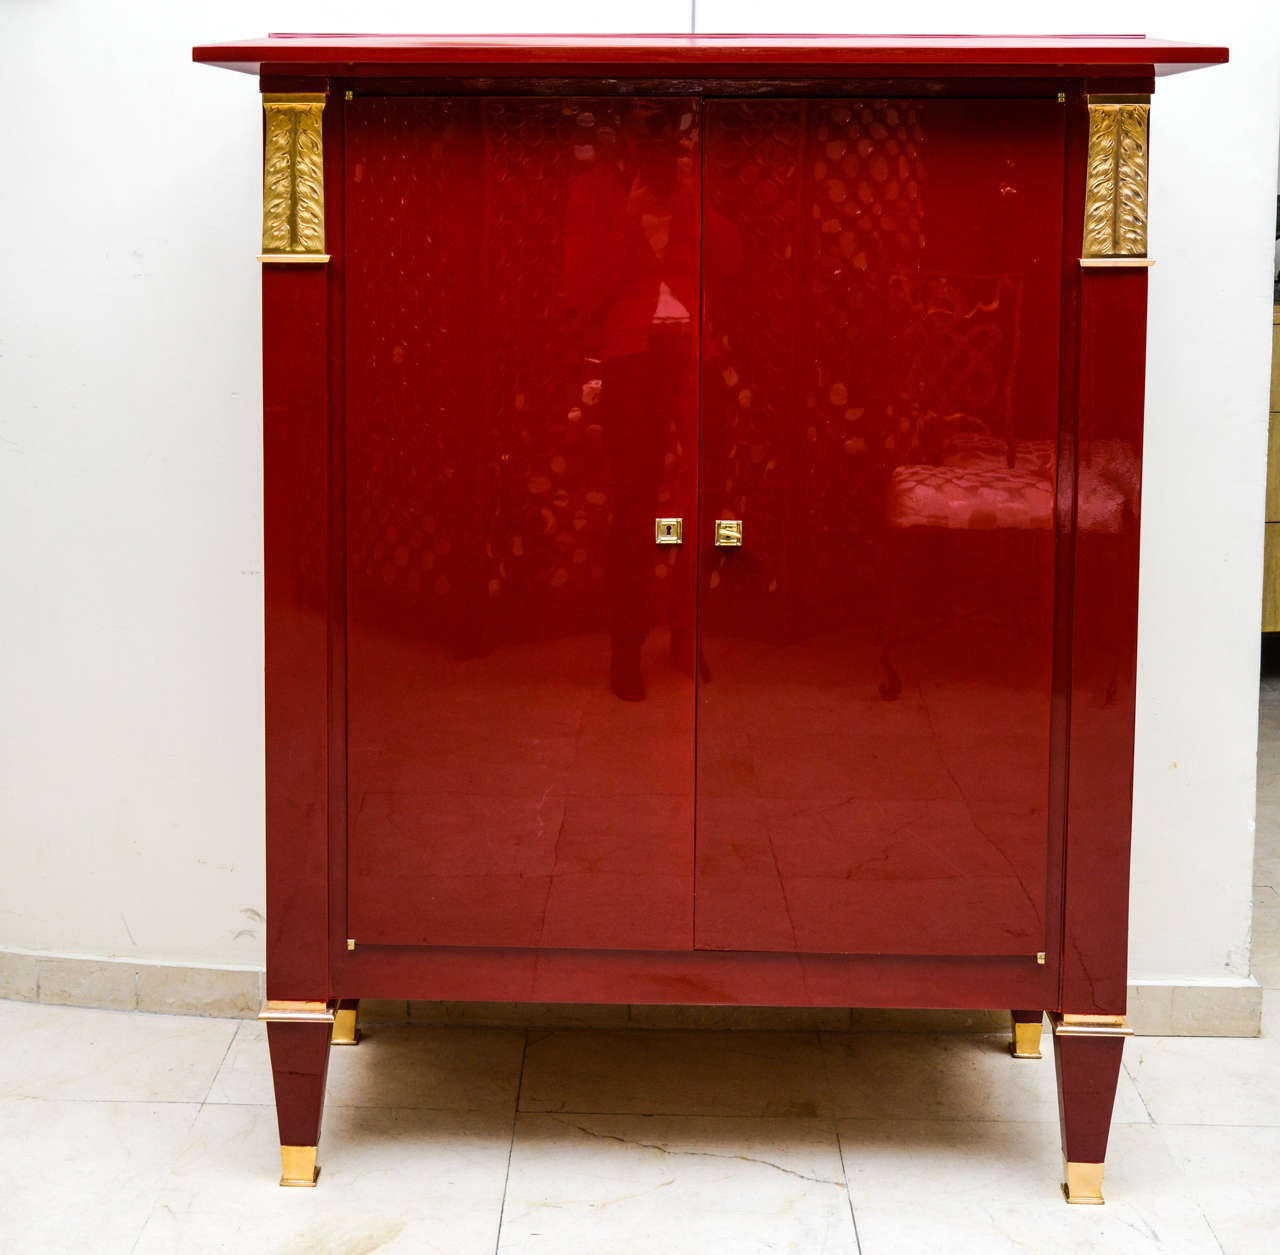 Rare 1940s cabinet or dry bar attributed to Arbus, hermes red lacquer on wood.
Oppening with two doors on an oak inside with two shelves.
Magnificent bronze ormoulu decoration on the top and the legs.